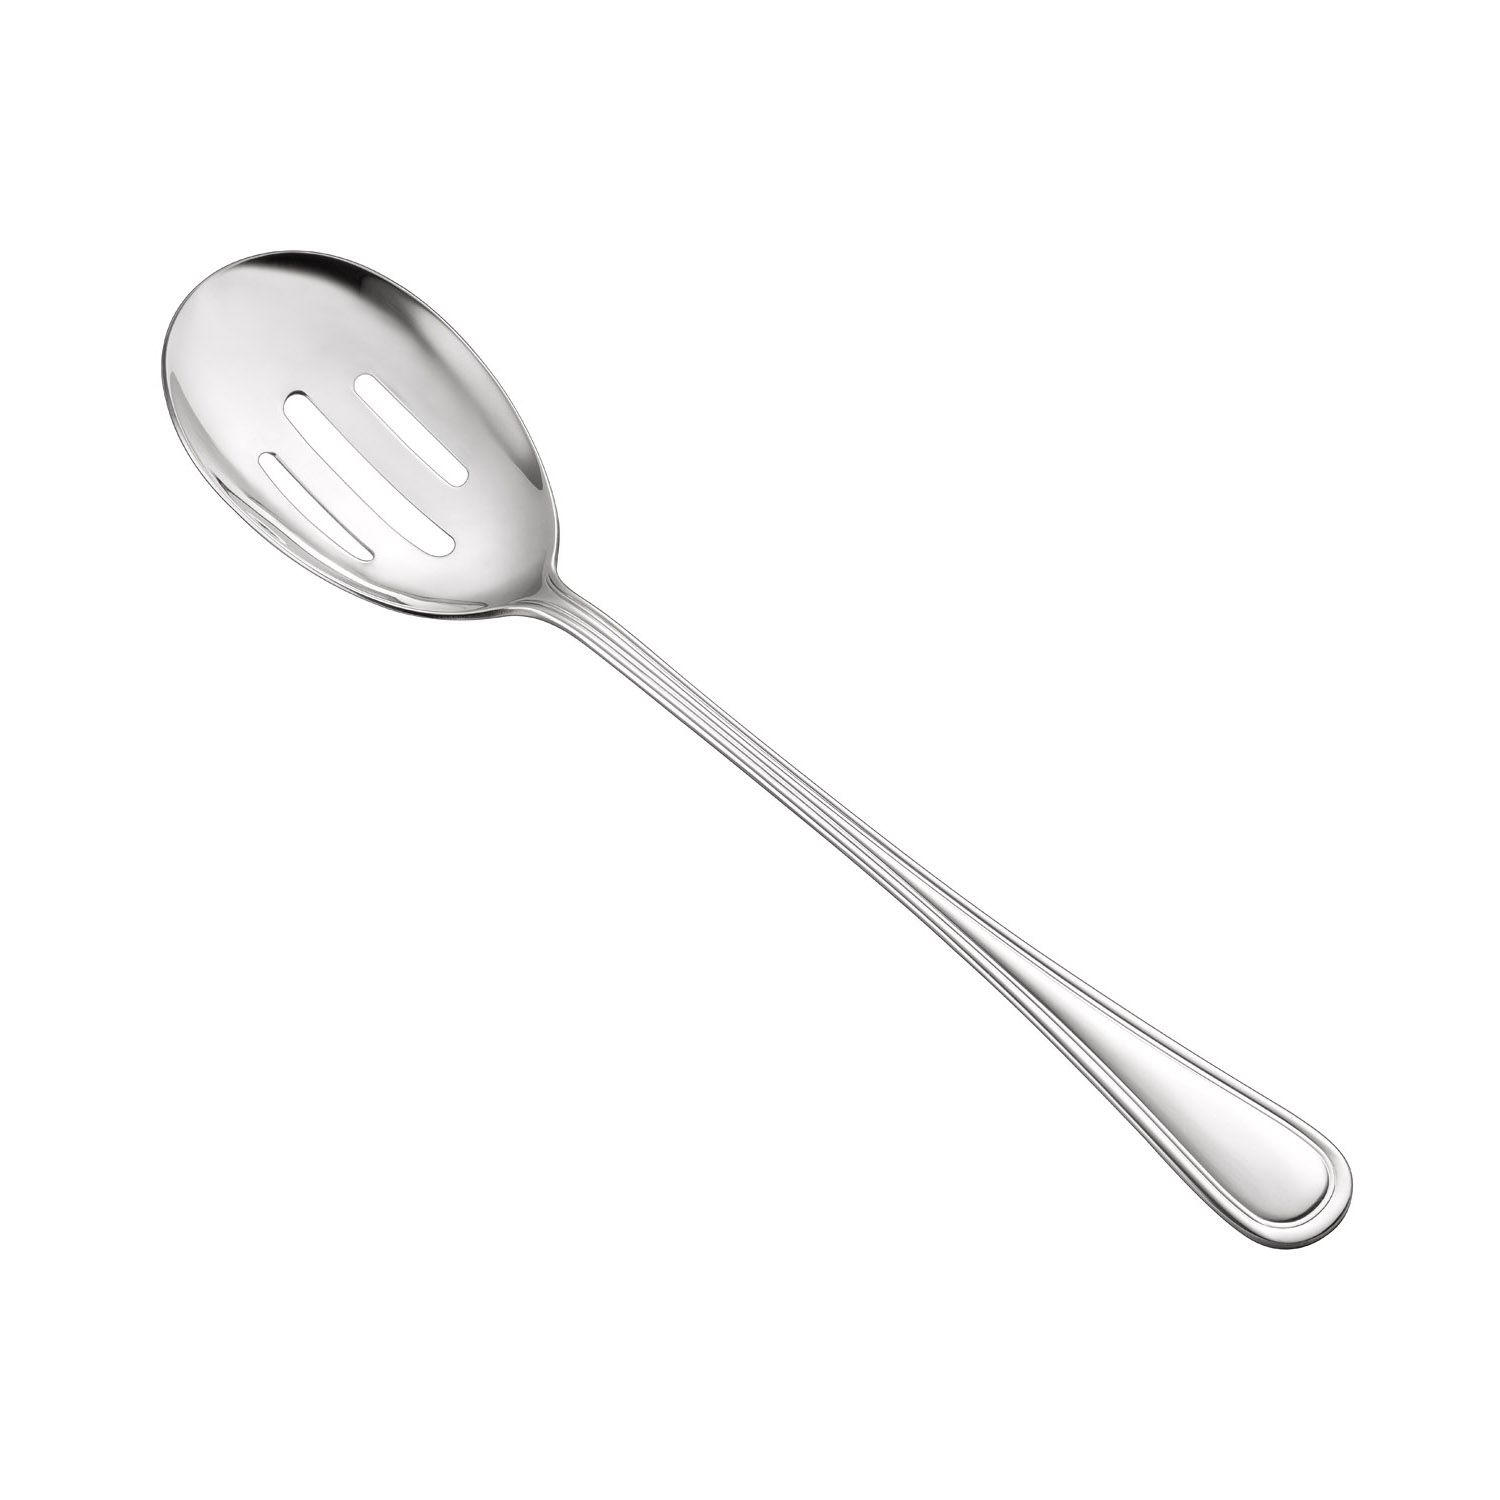 CAC China 8002-20 Elite Slotted, Spoon, Extra Heavyweight 18/8, 11-1/2"